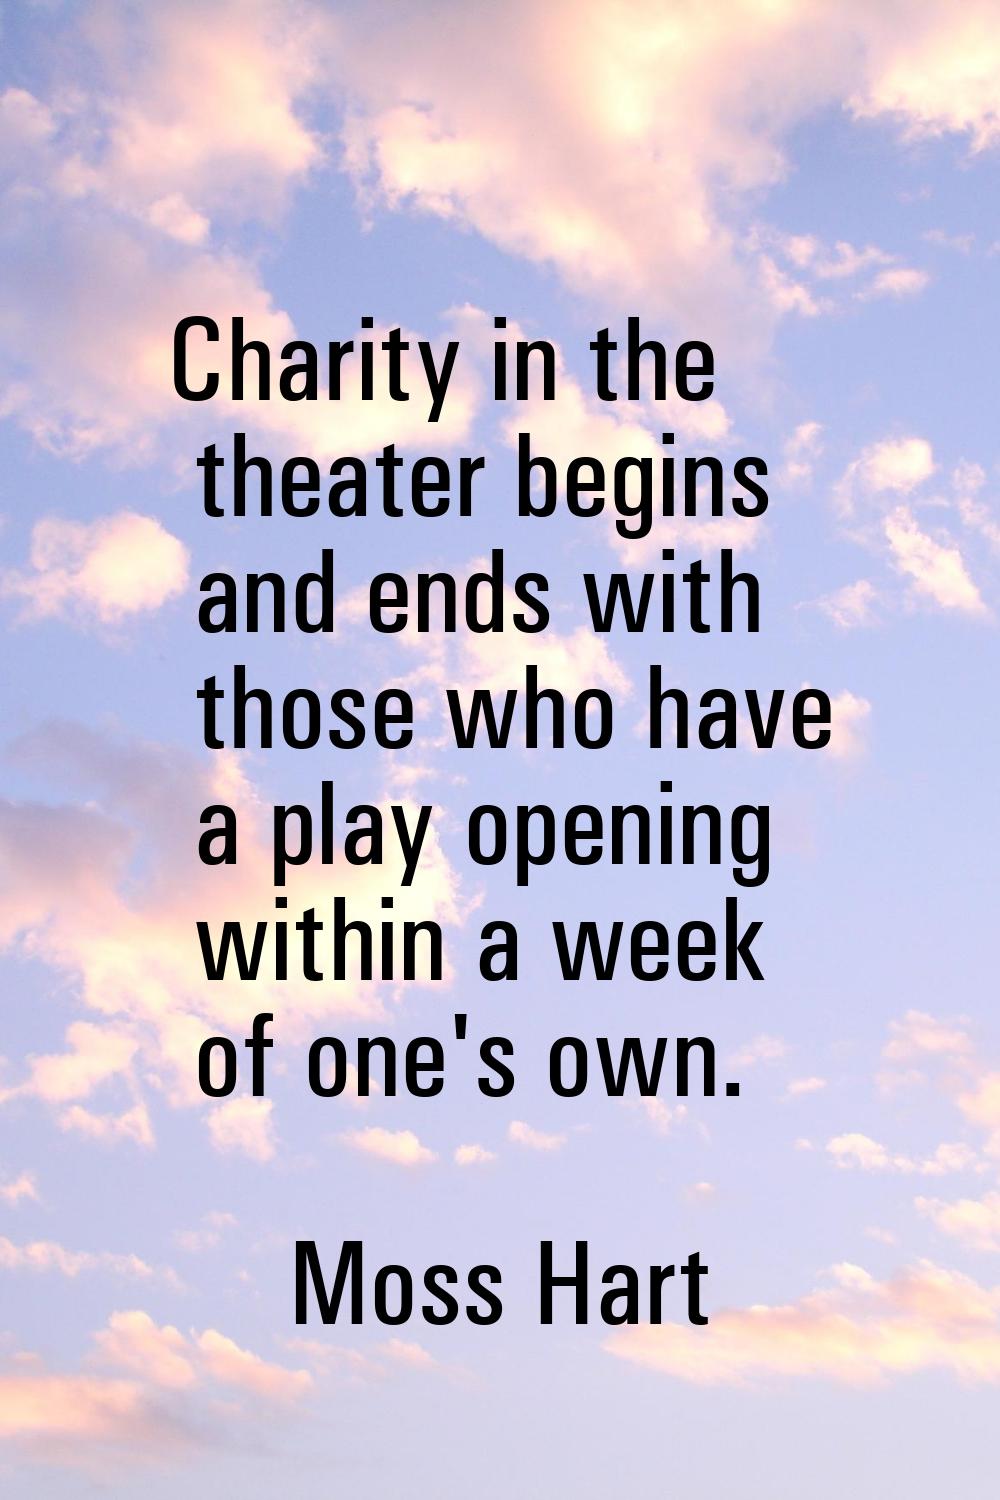 Charity in the theater begins and ends with those who have a play opening within a week of one's ow